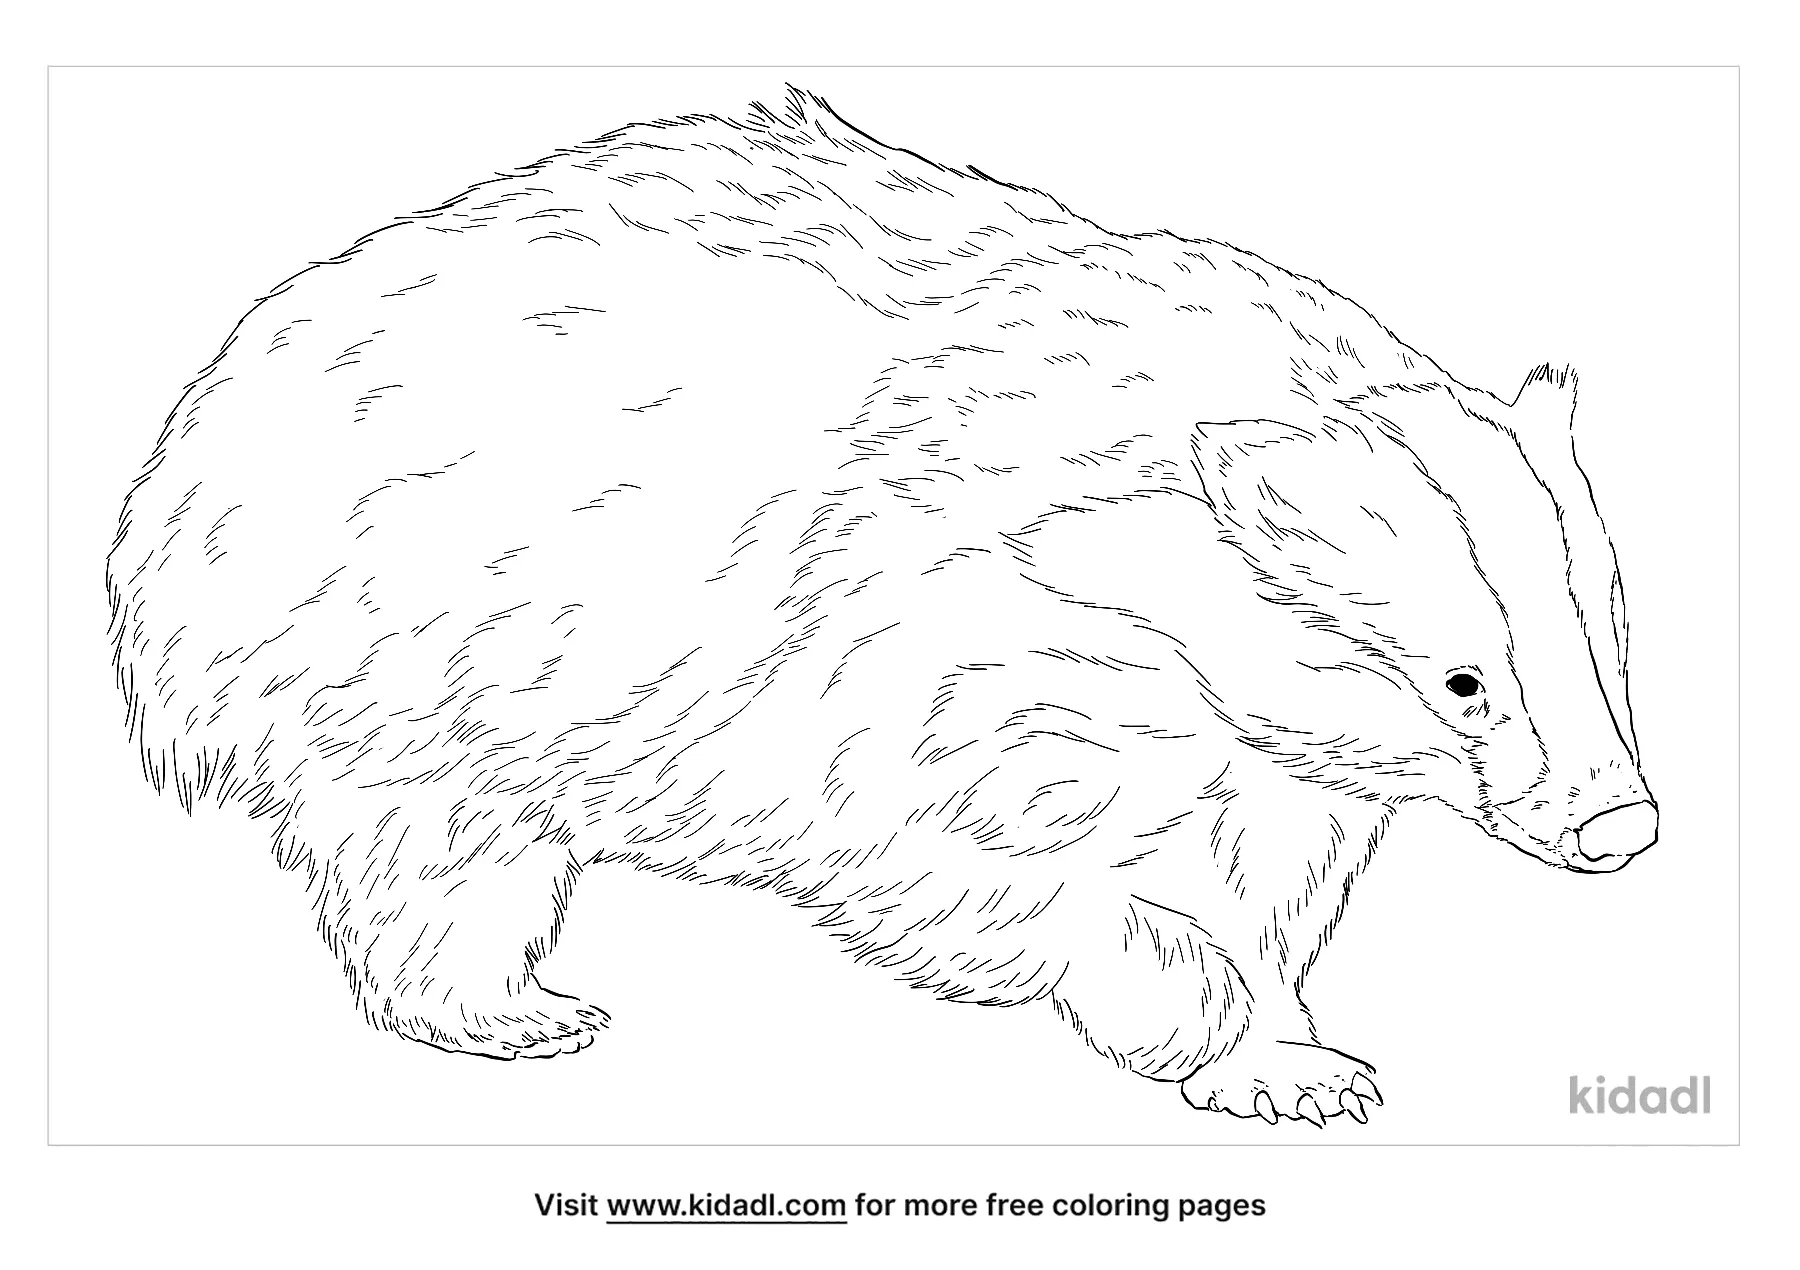 European Badger Coloring Page   Free Mammals Coloring Page   Kidadl